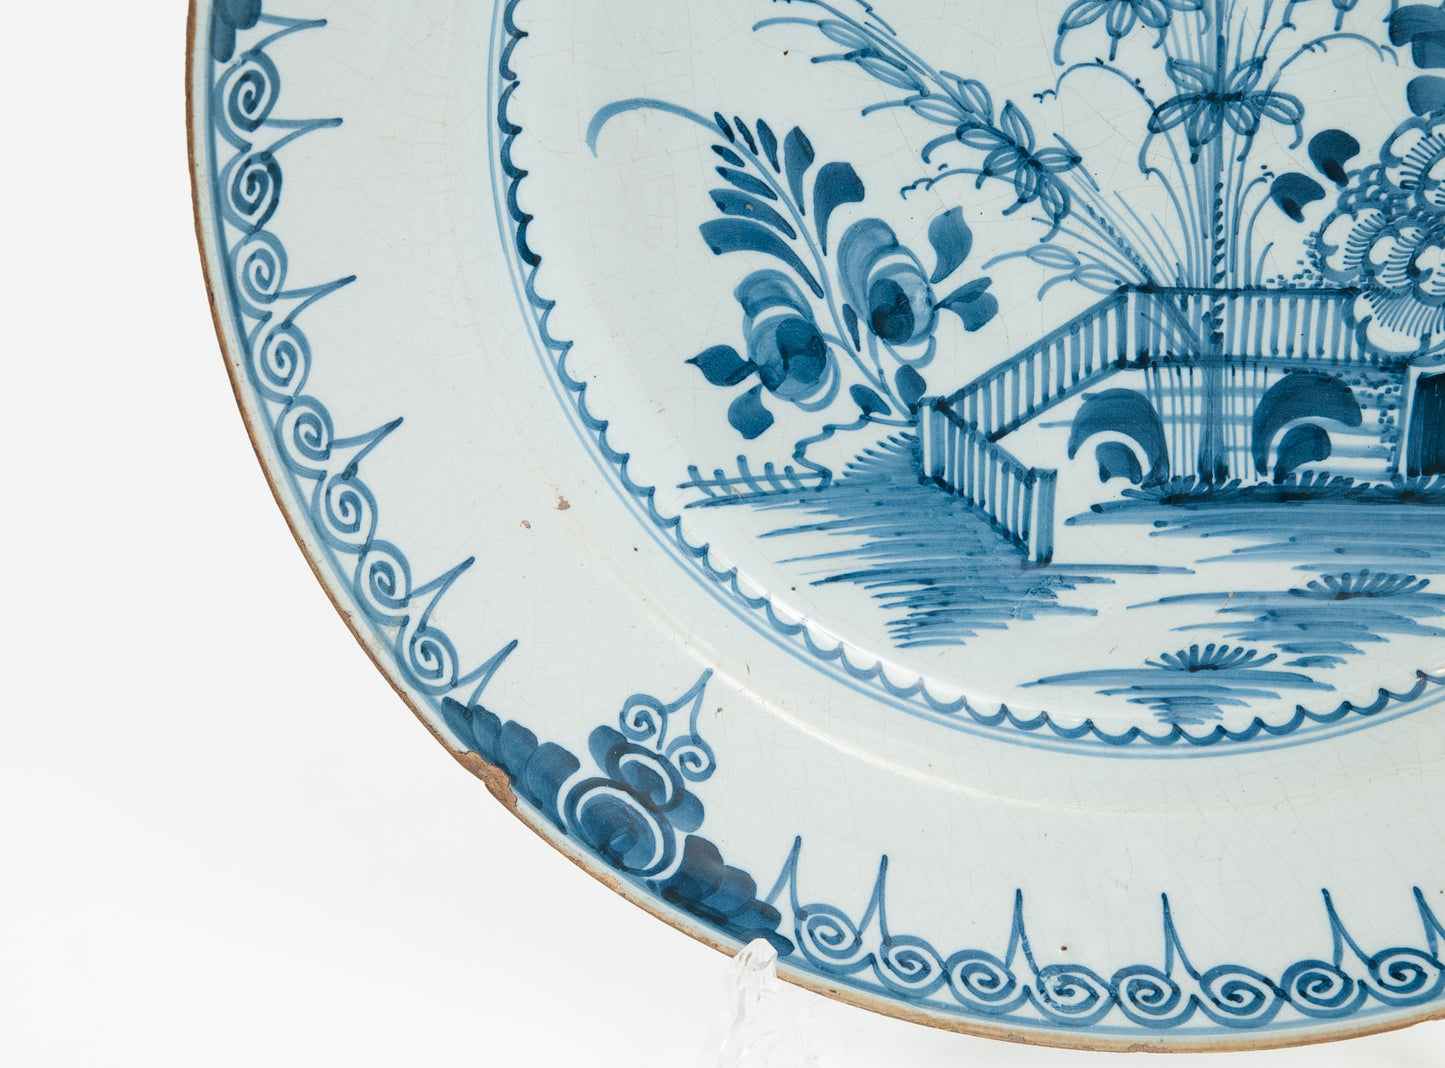 Mid 18th Century London Lambeth English Delft Ware Chinoiserie Charger c1760 (Code 1892)